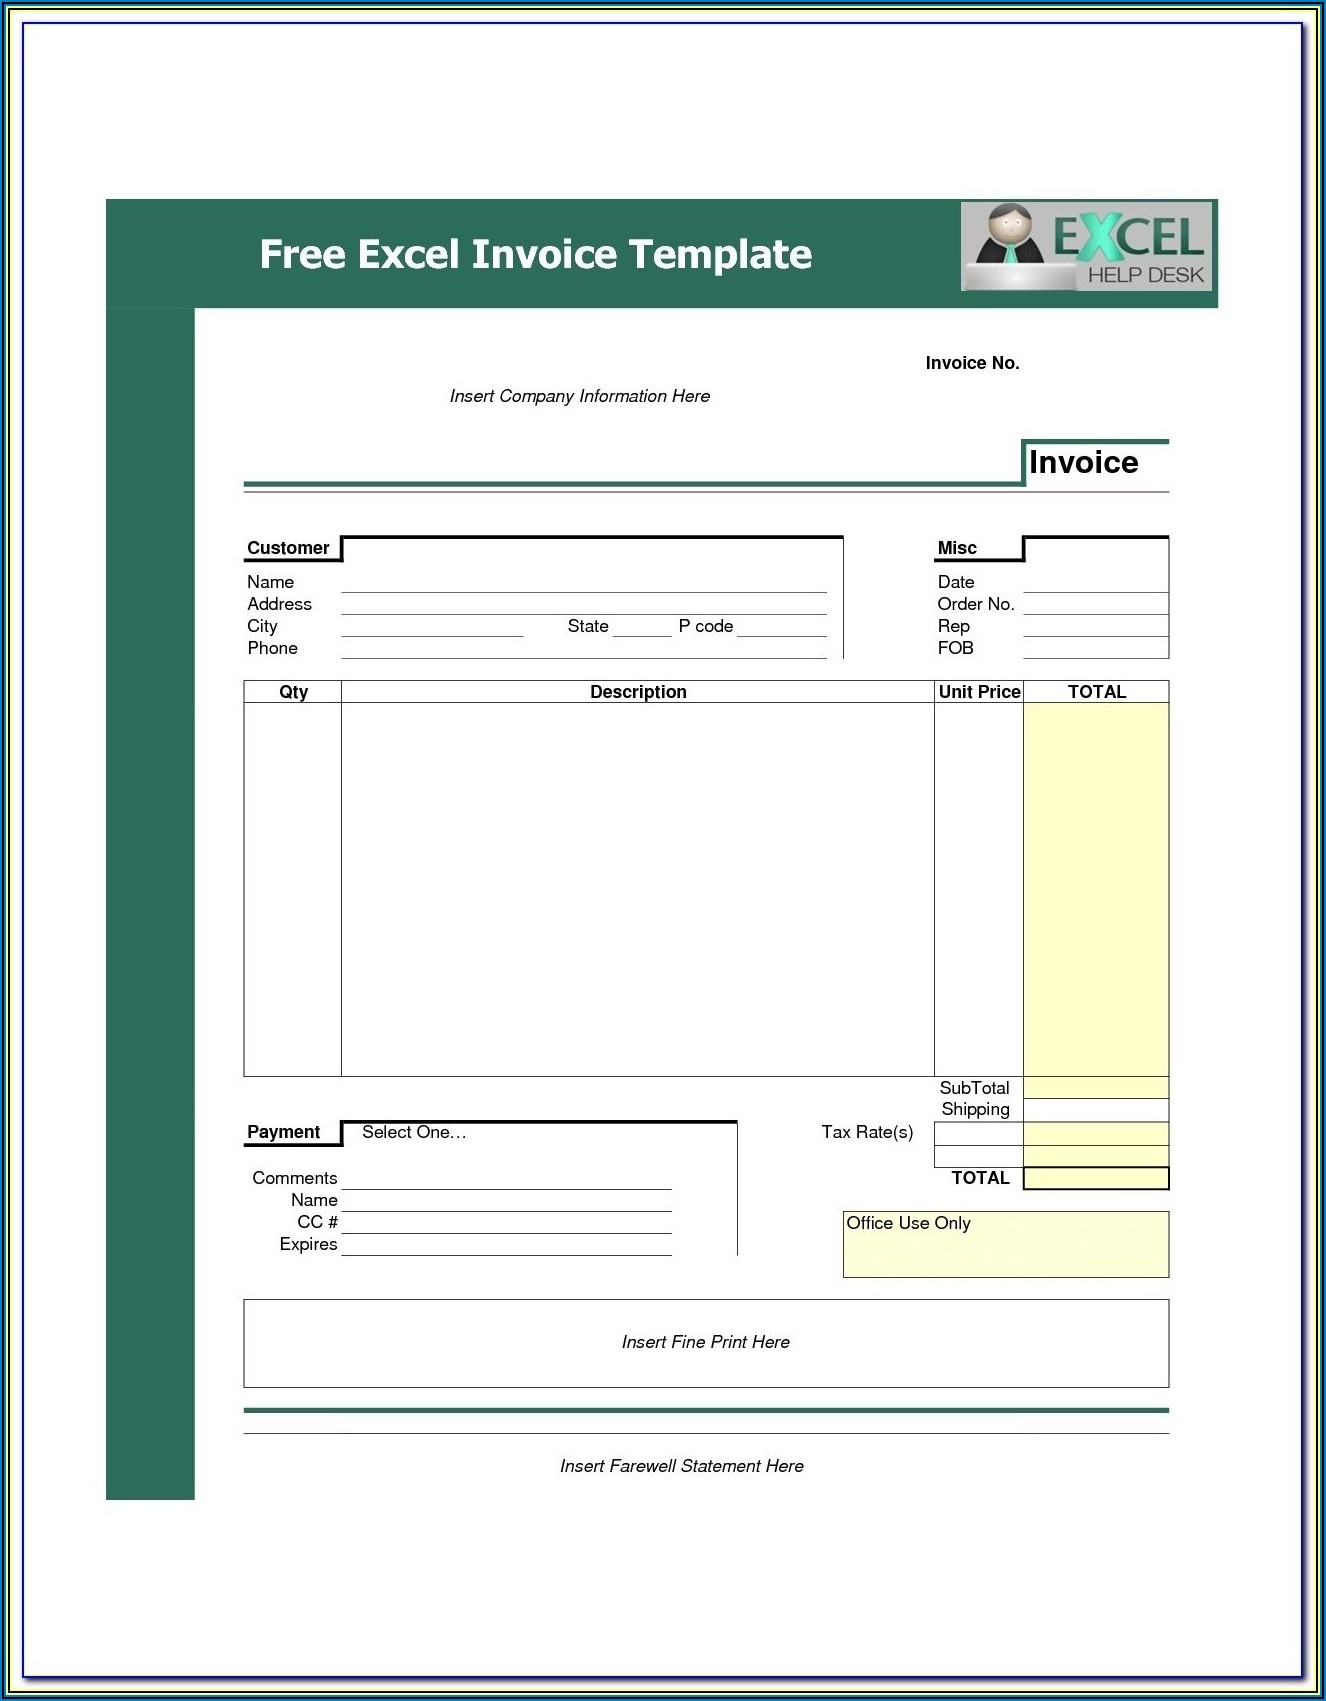 How To Make An Editable Pdf Form In Word